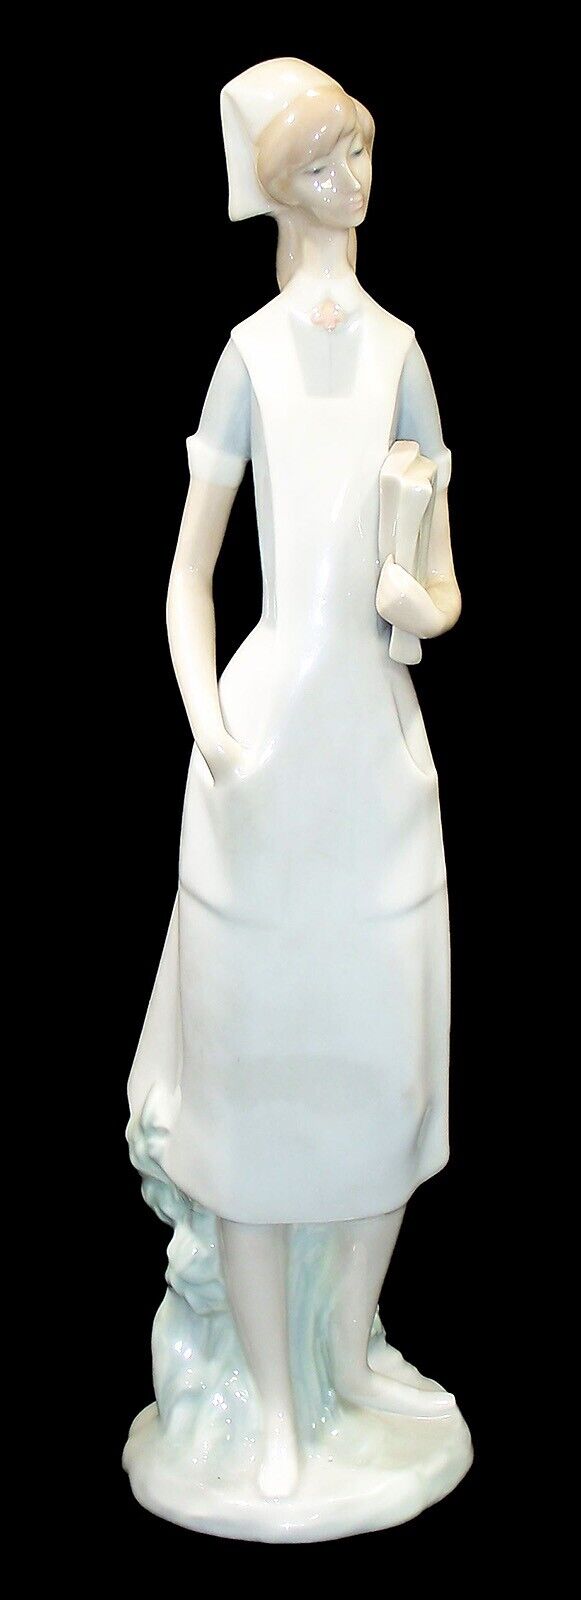 Lladro Professionals “Nurse with Charts” Porcelain Figurine, #4603, 14.25” High